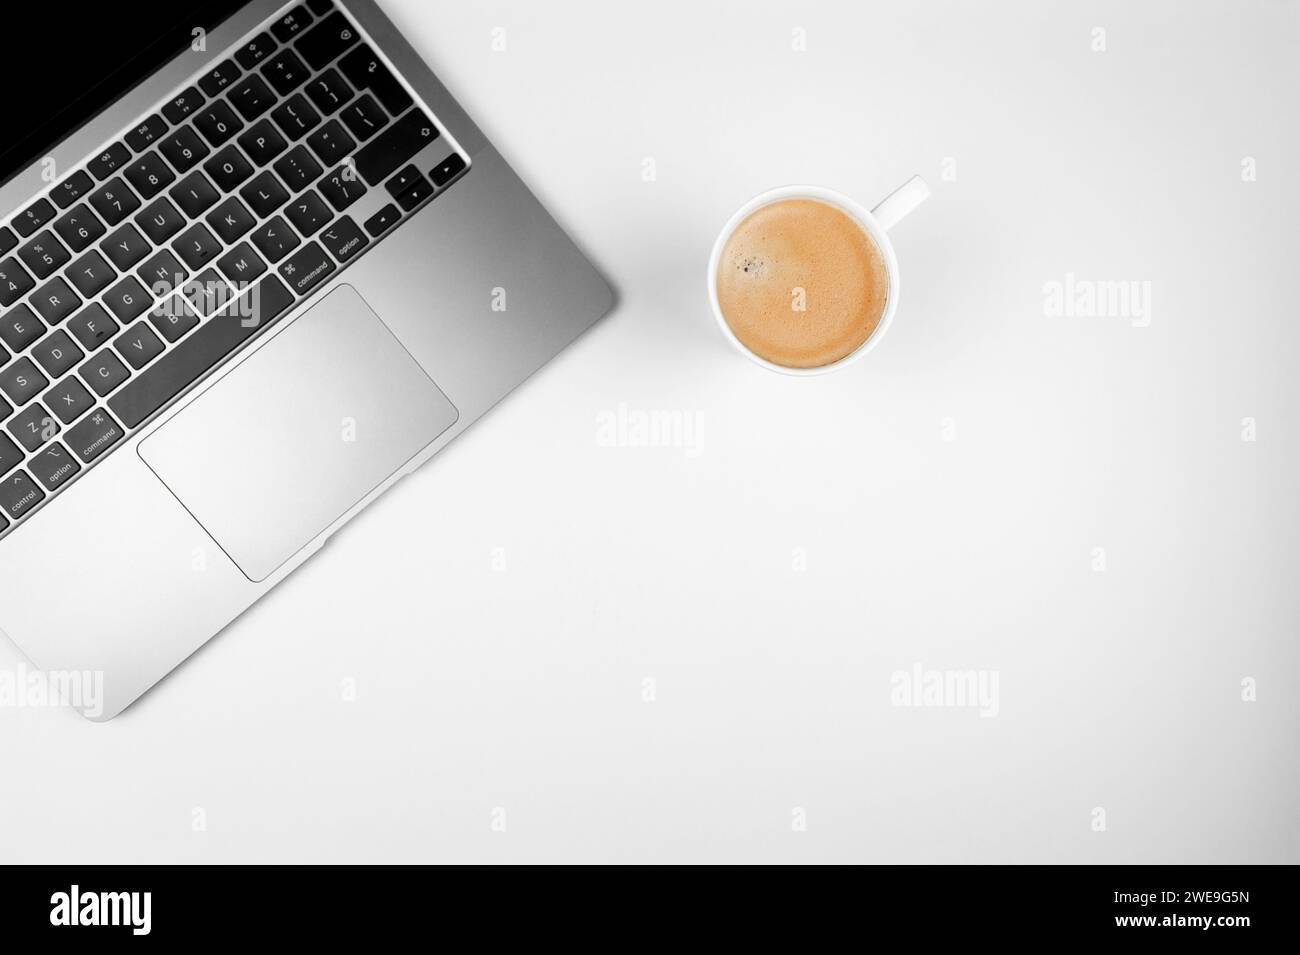 Top view of grey laptop computer on white background. Coffee cup, flat lay, copy space. Stock Photo